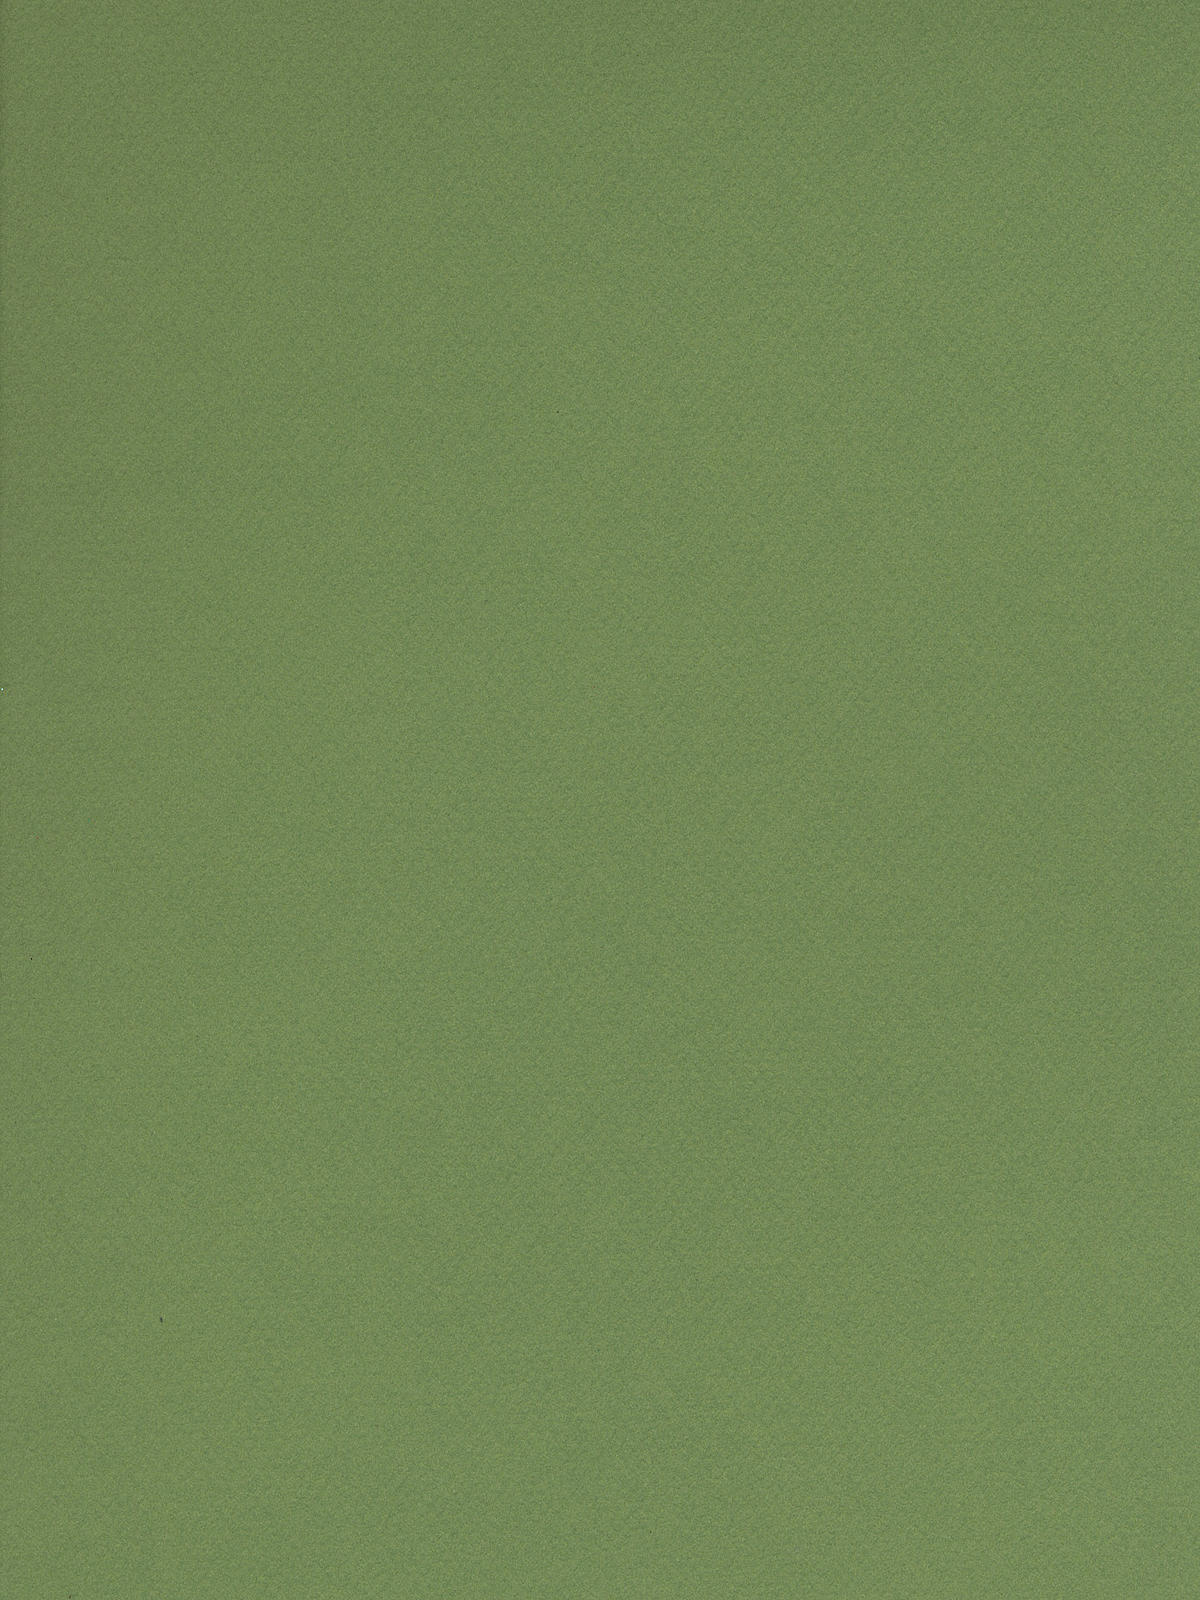 Mi-teintes Tinted Paper Green 19 In. X 25 In.